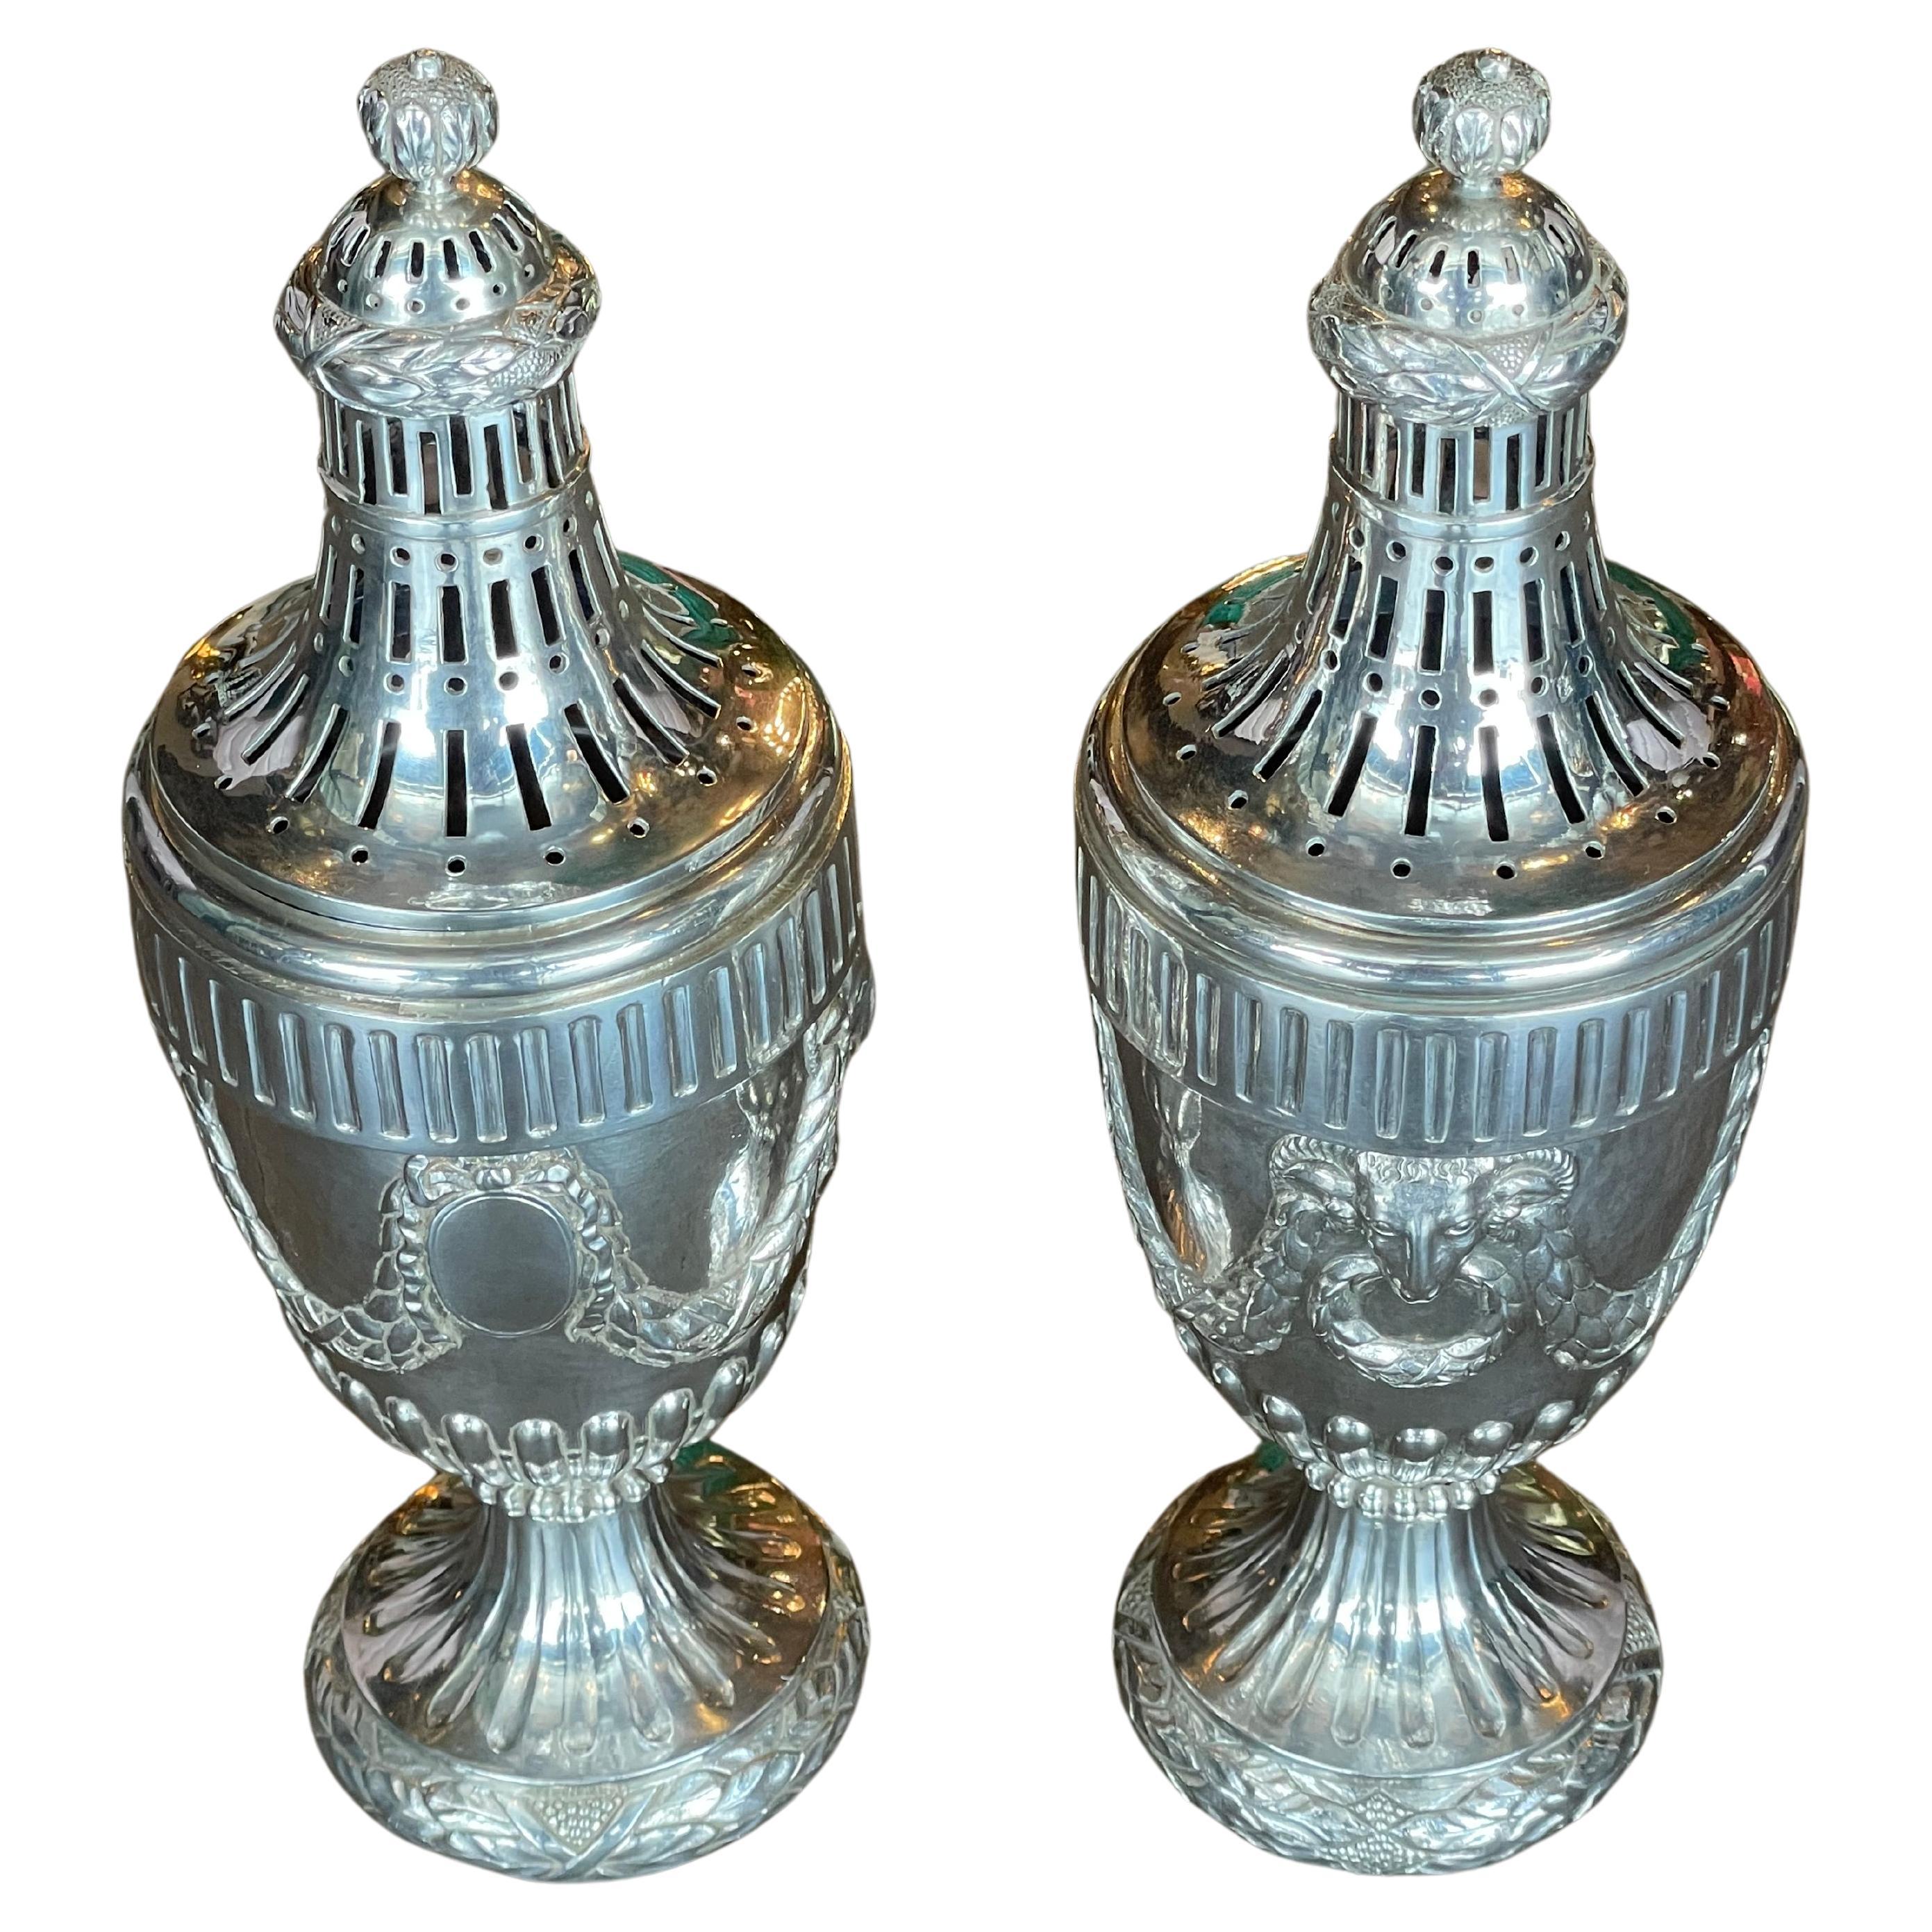 A pair of Dutch Neoclassical silver potpourri urns, the Hague, late 18th century
Sourced by Martyn Lawrence Bullard
Hallmarked sterling silver